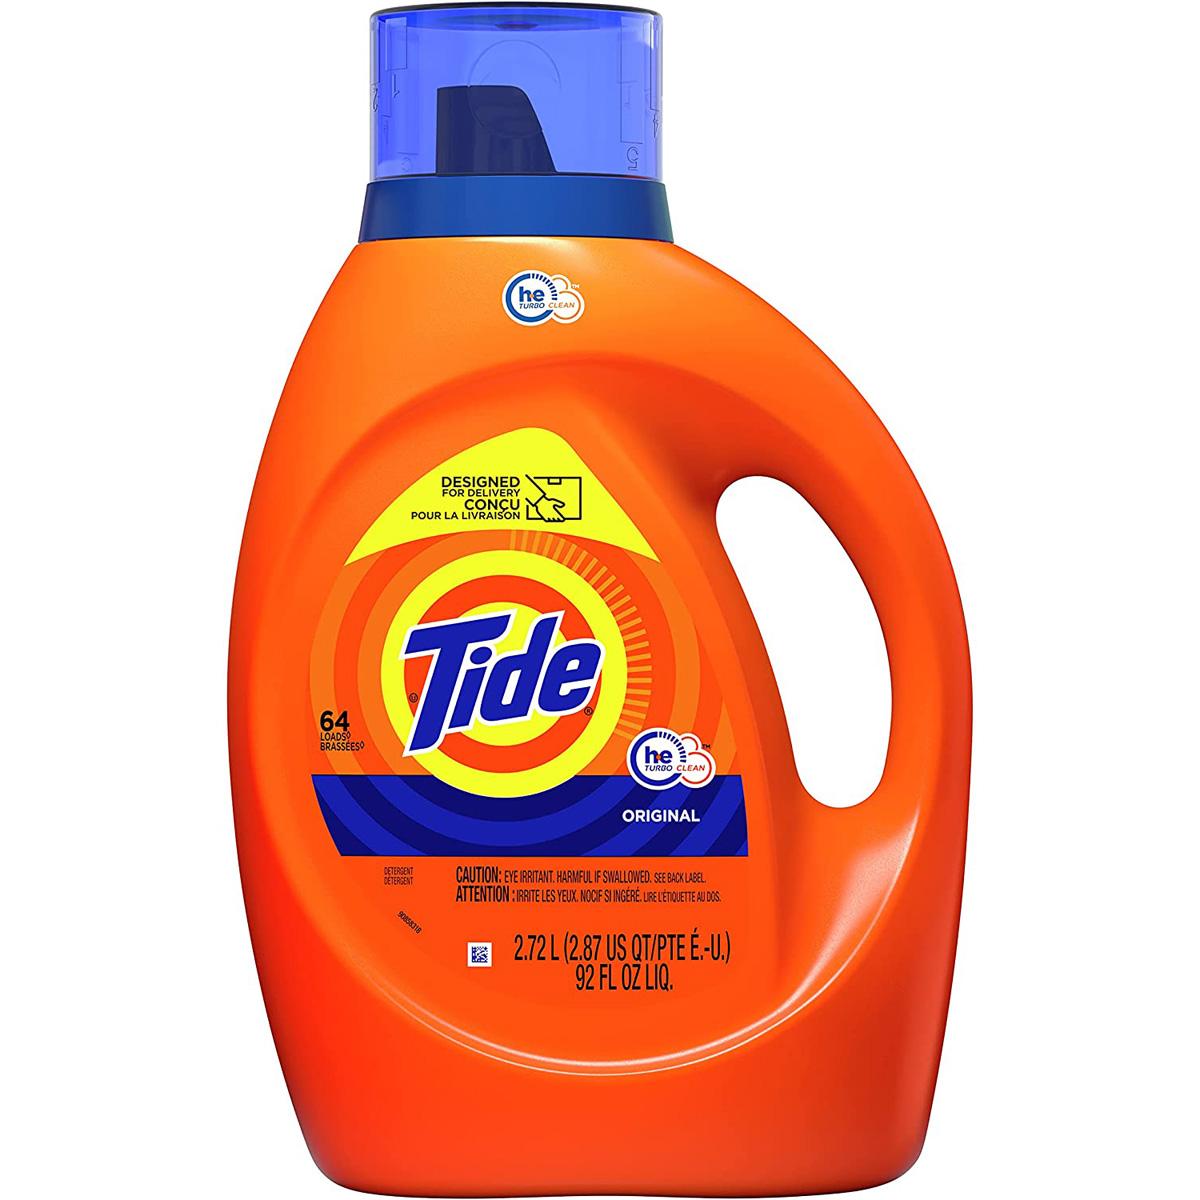 Tide Liquid Laundry Detergent Soap for $8.37 Shipped